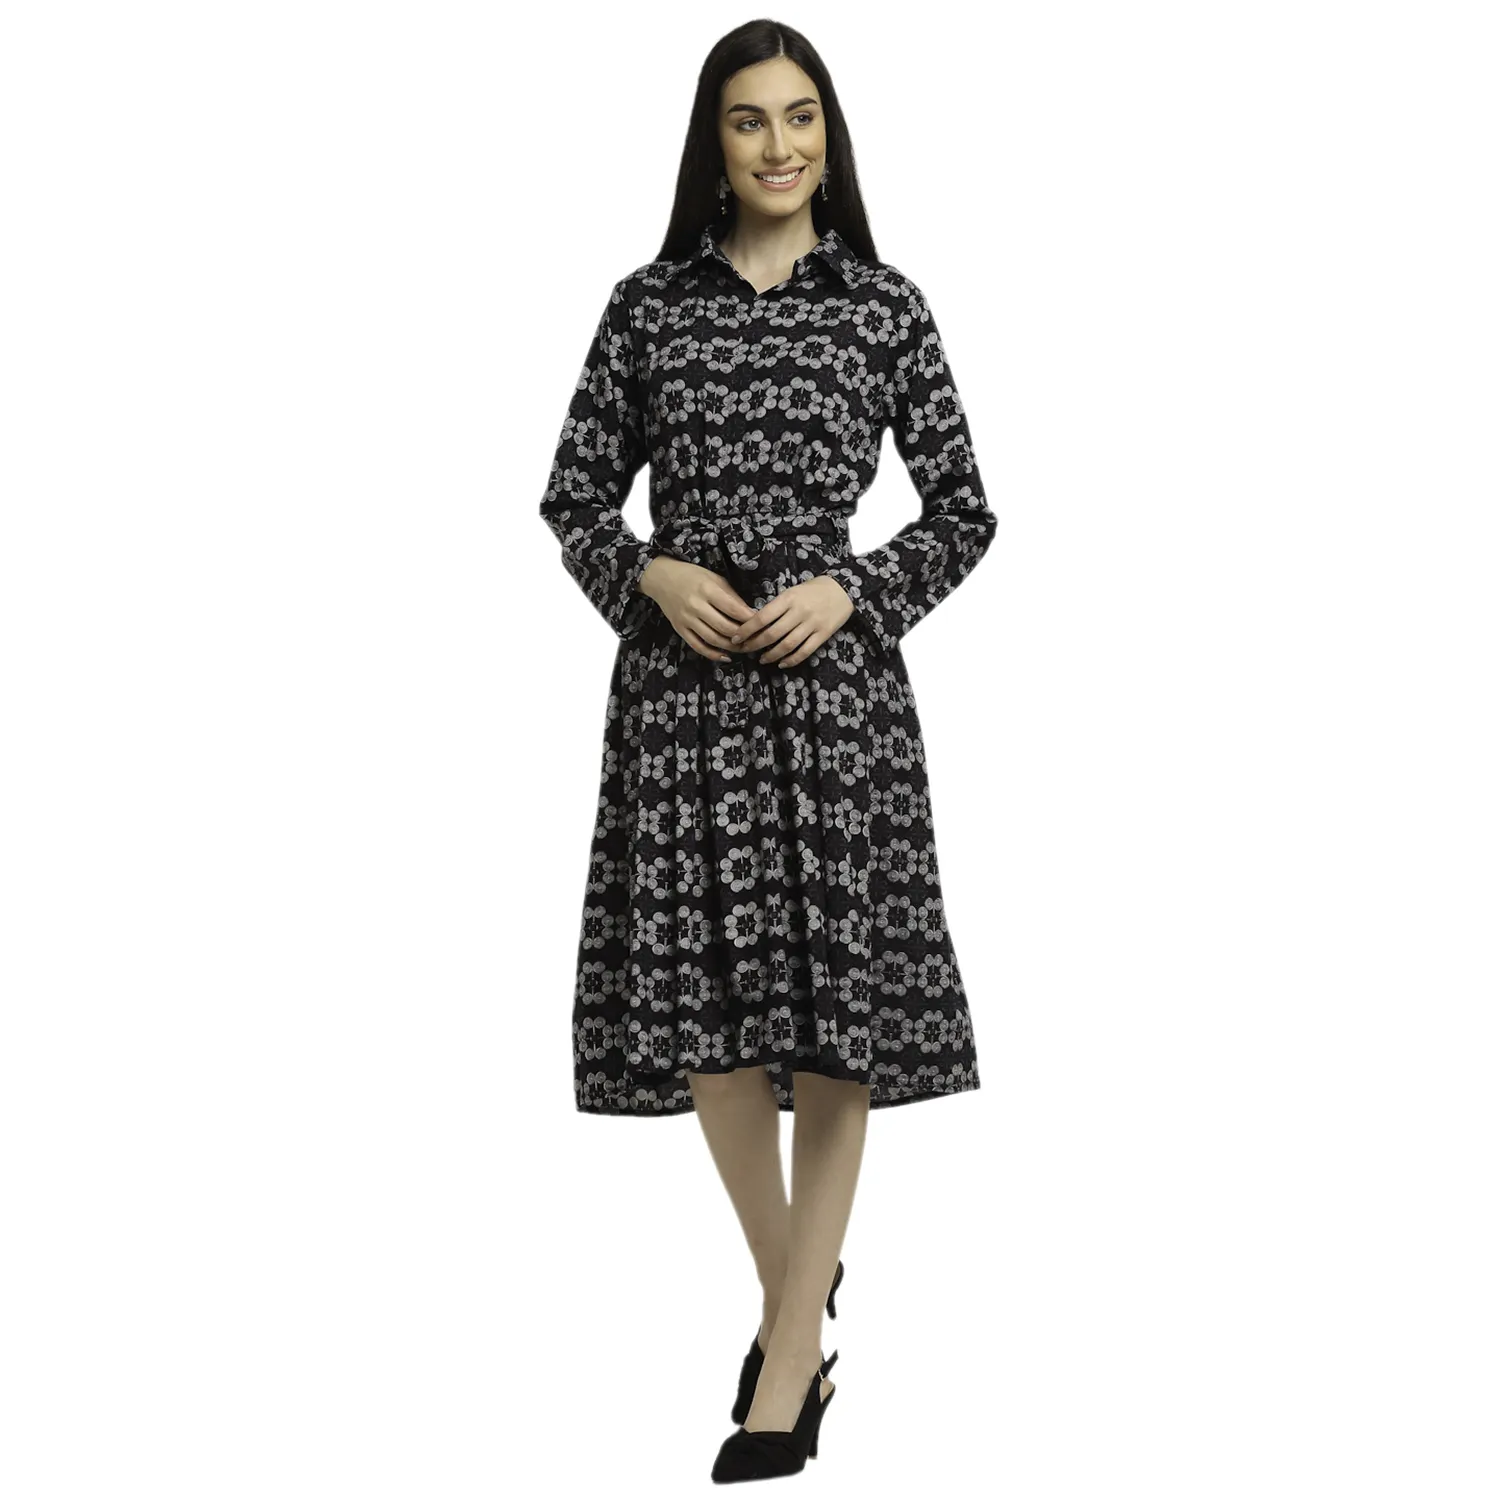 Women's Fit and Flare Rayon Black HC Printed Collar Neck Midi Knee Length A-Line Short Smoked Wrap Dress with Sleeves (AM204)